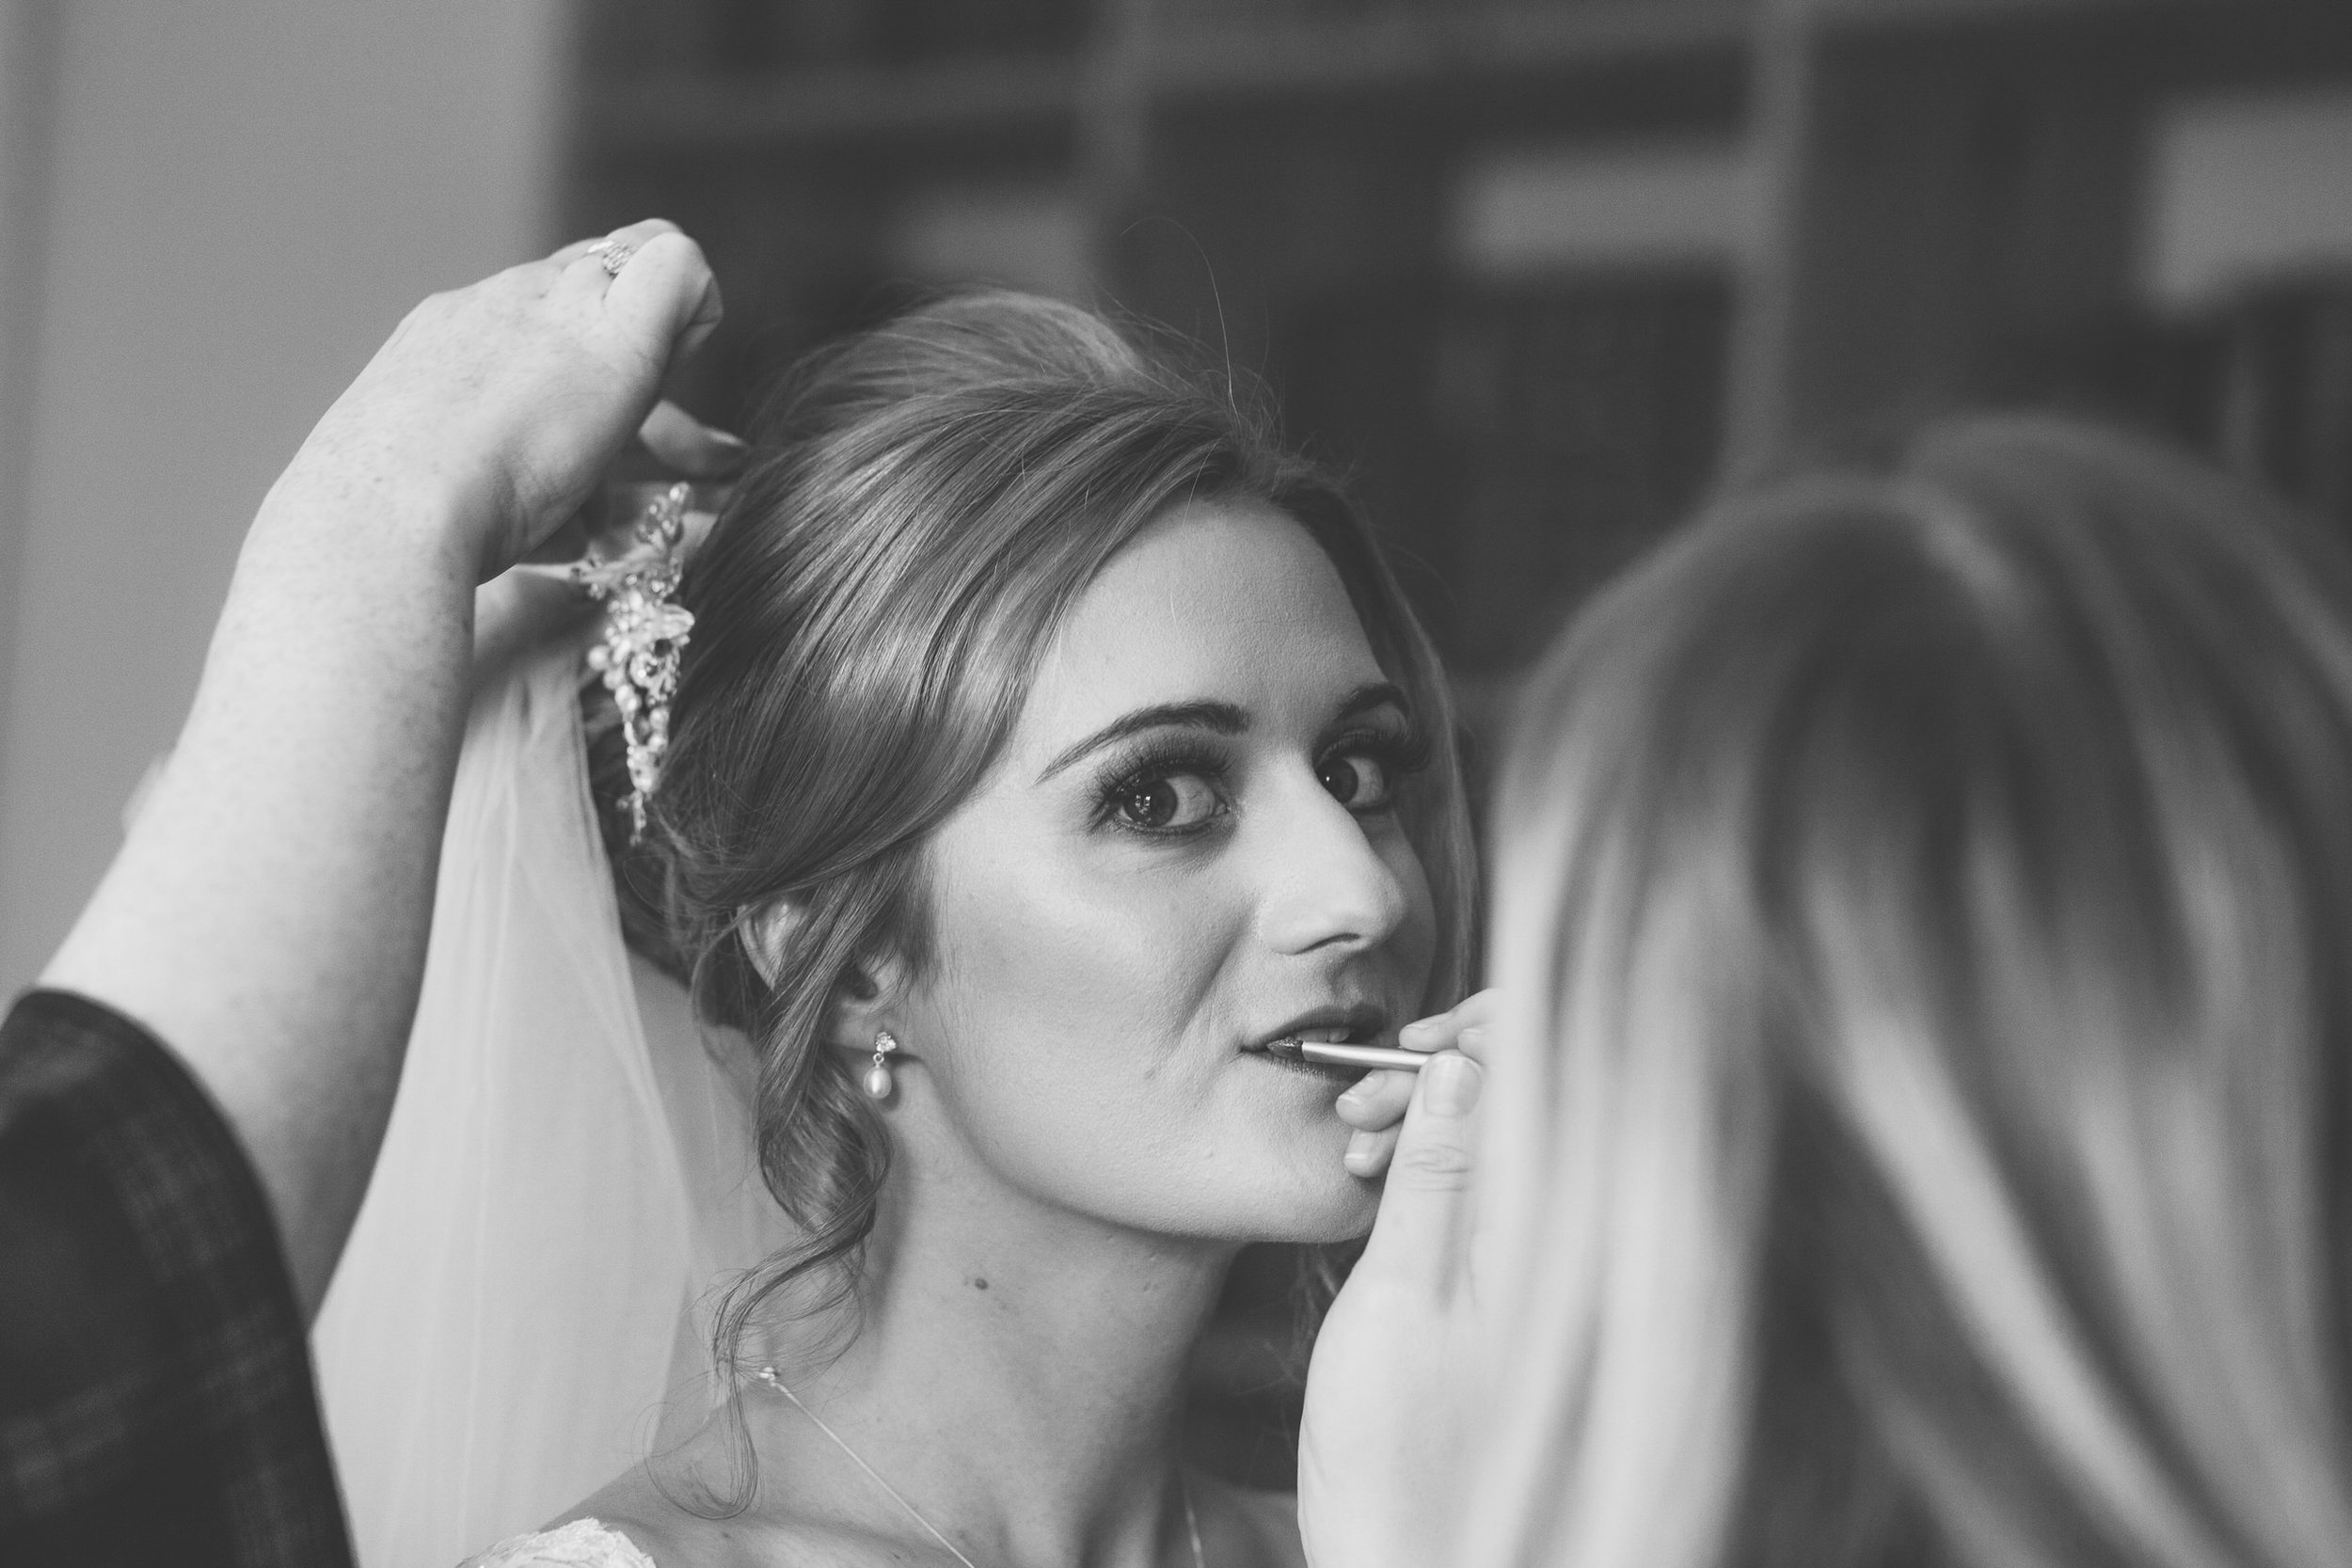 logie country house, Tiffany Dawson make up artist, hair by Marianne gibb, logie country house wedding